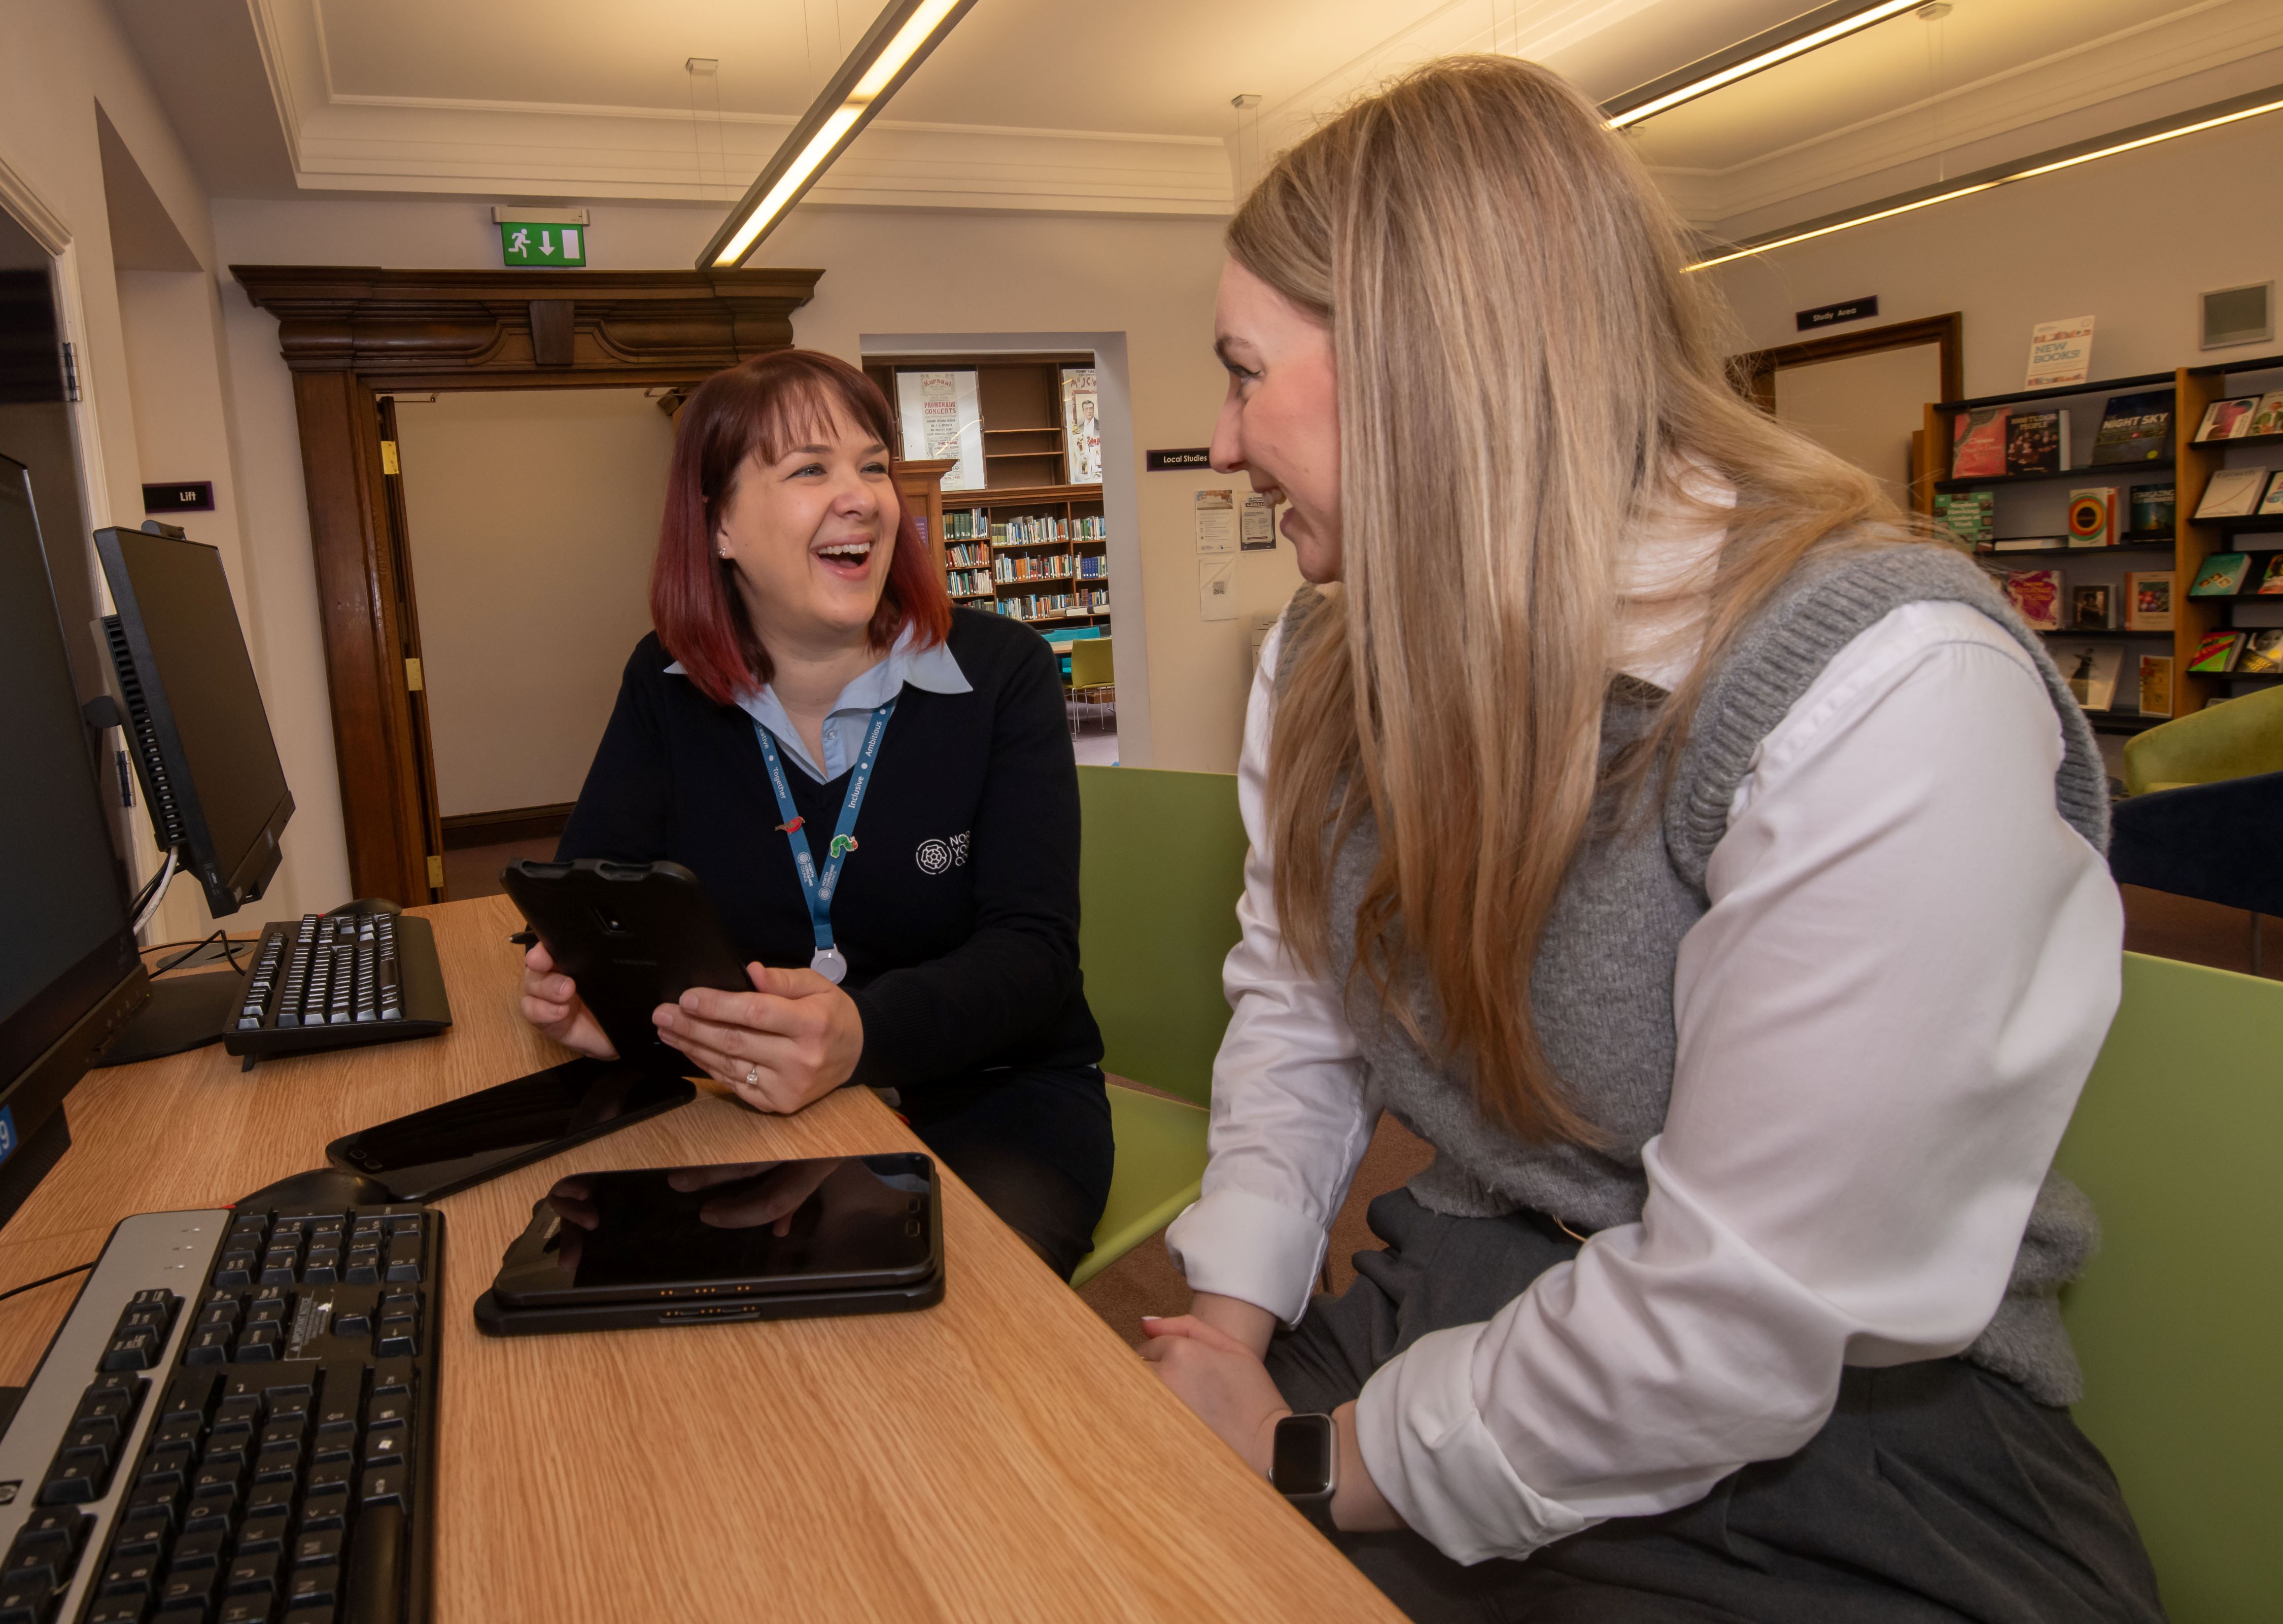 North Yorkshire Council’s library supervisor at Harrogate Library, Catherine Skyvington, and Vp plc’s group risk and sustainability officer, Ellie Rose, at Harrogate Library.